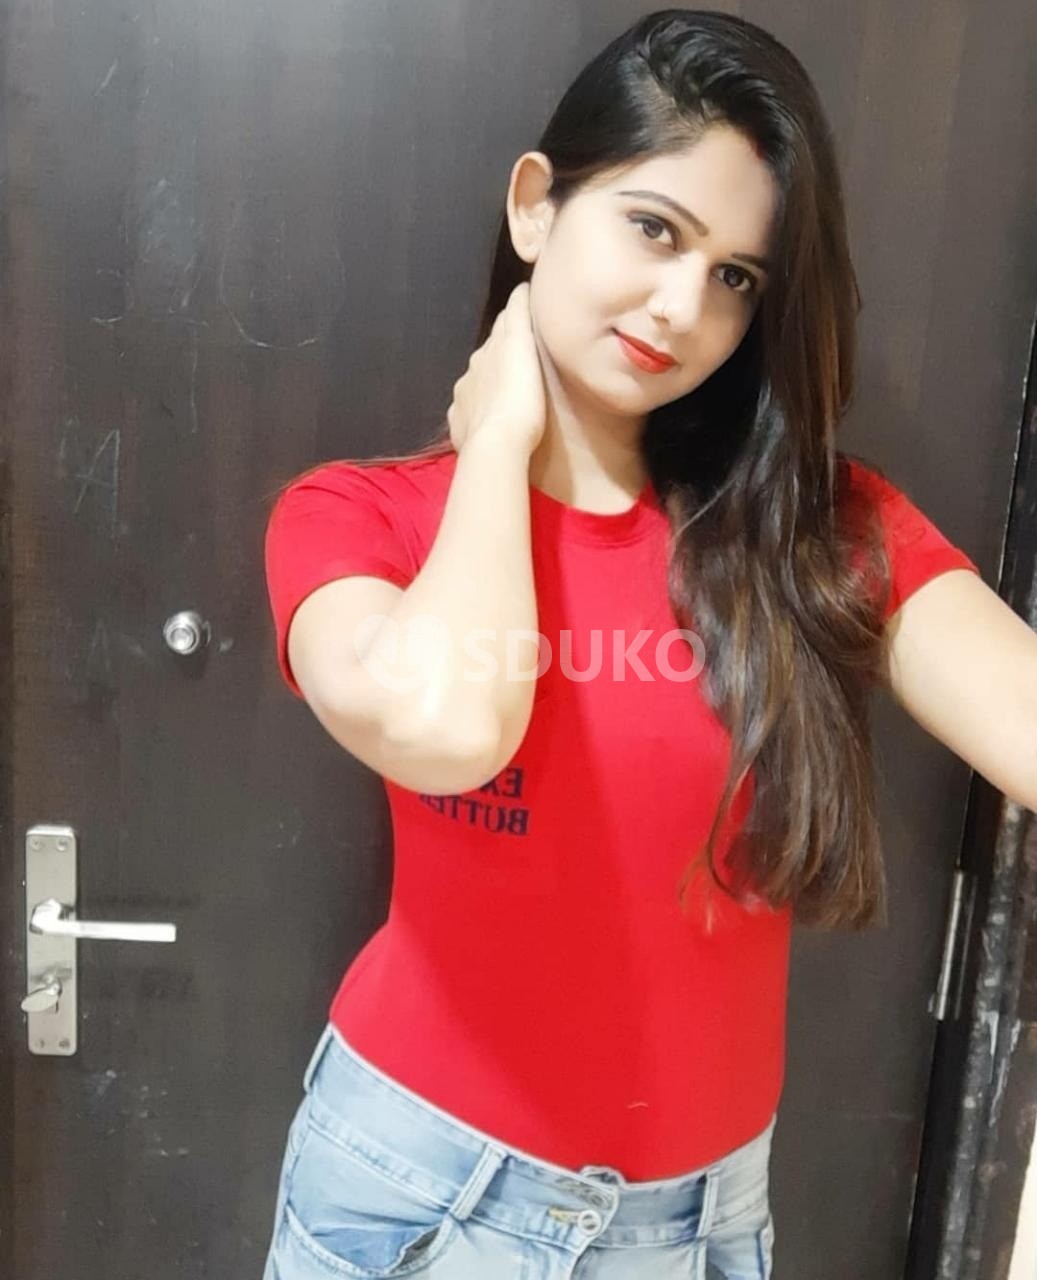 KOLKATA LOW RATE KAVYA ESCORT FULL HARD FUCK WITH NAUGHTY IF YOU WANT TO FUCK MY PUSSY WITH BIG BOOBS GIRLS- CALL AND